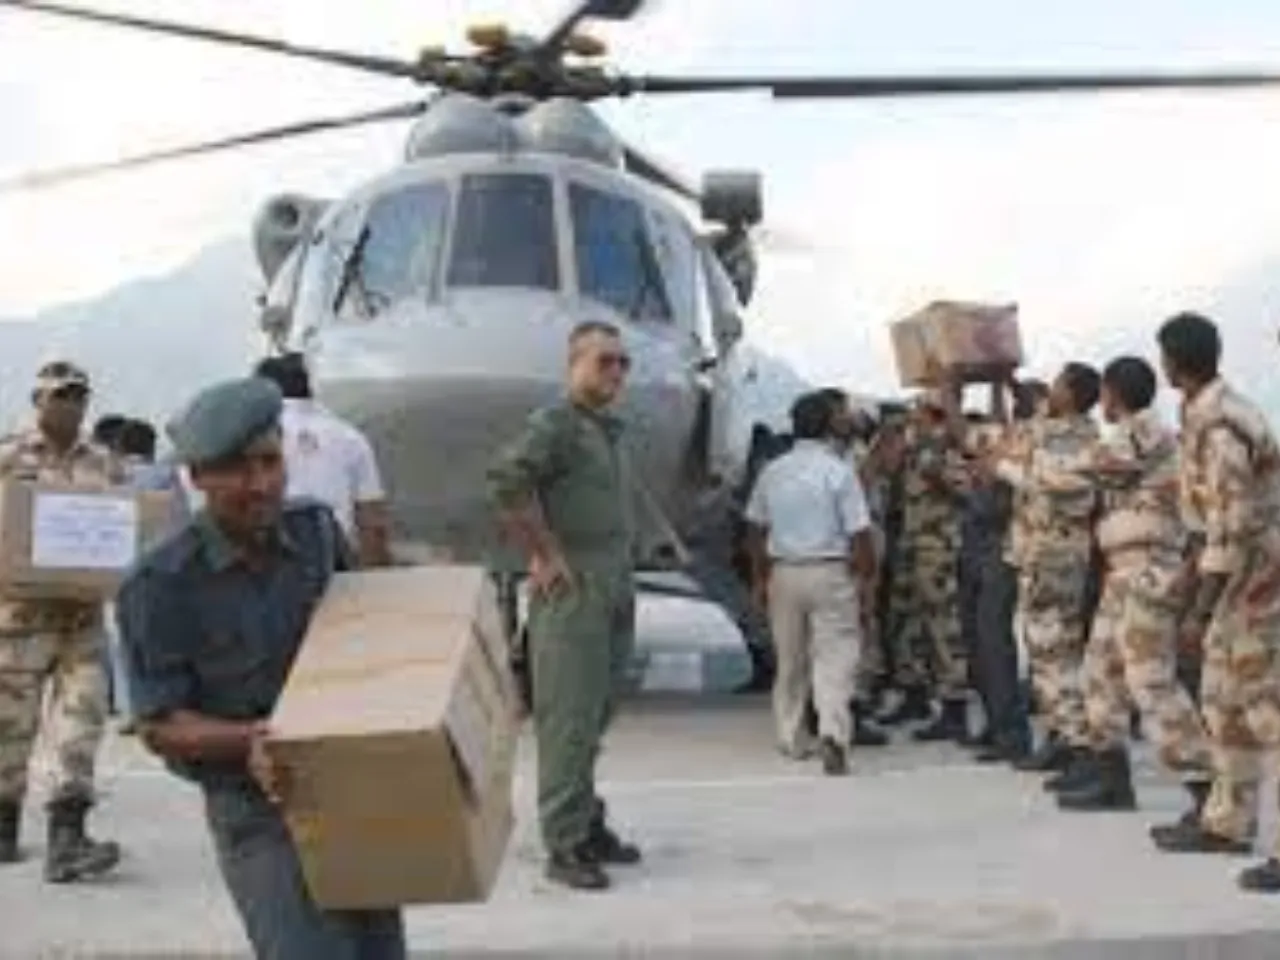 Air force said that 400 kg of relief has been provided